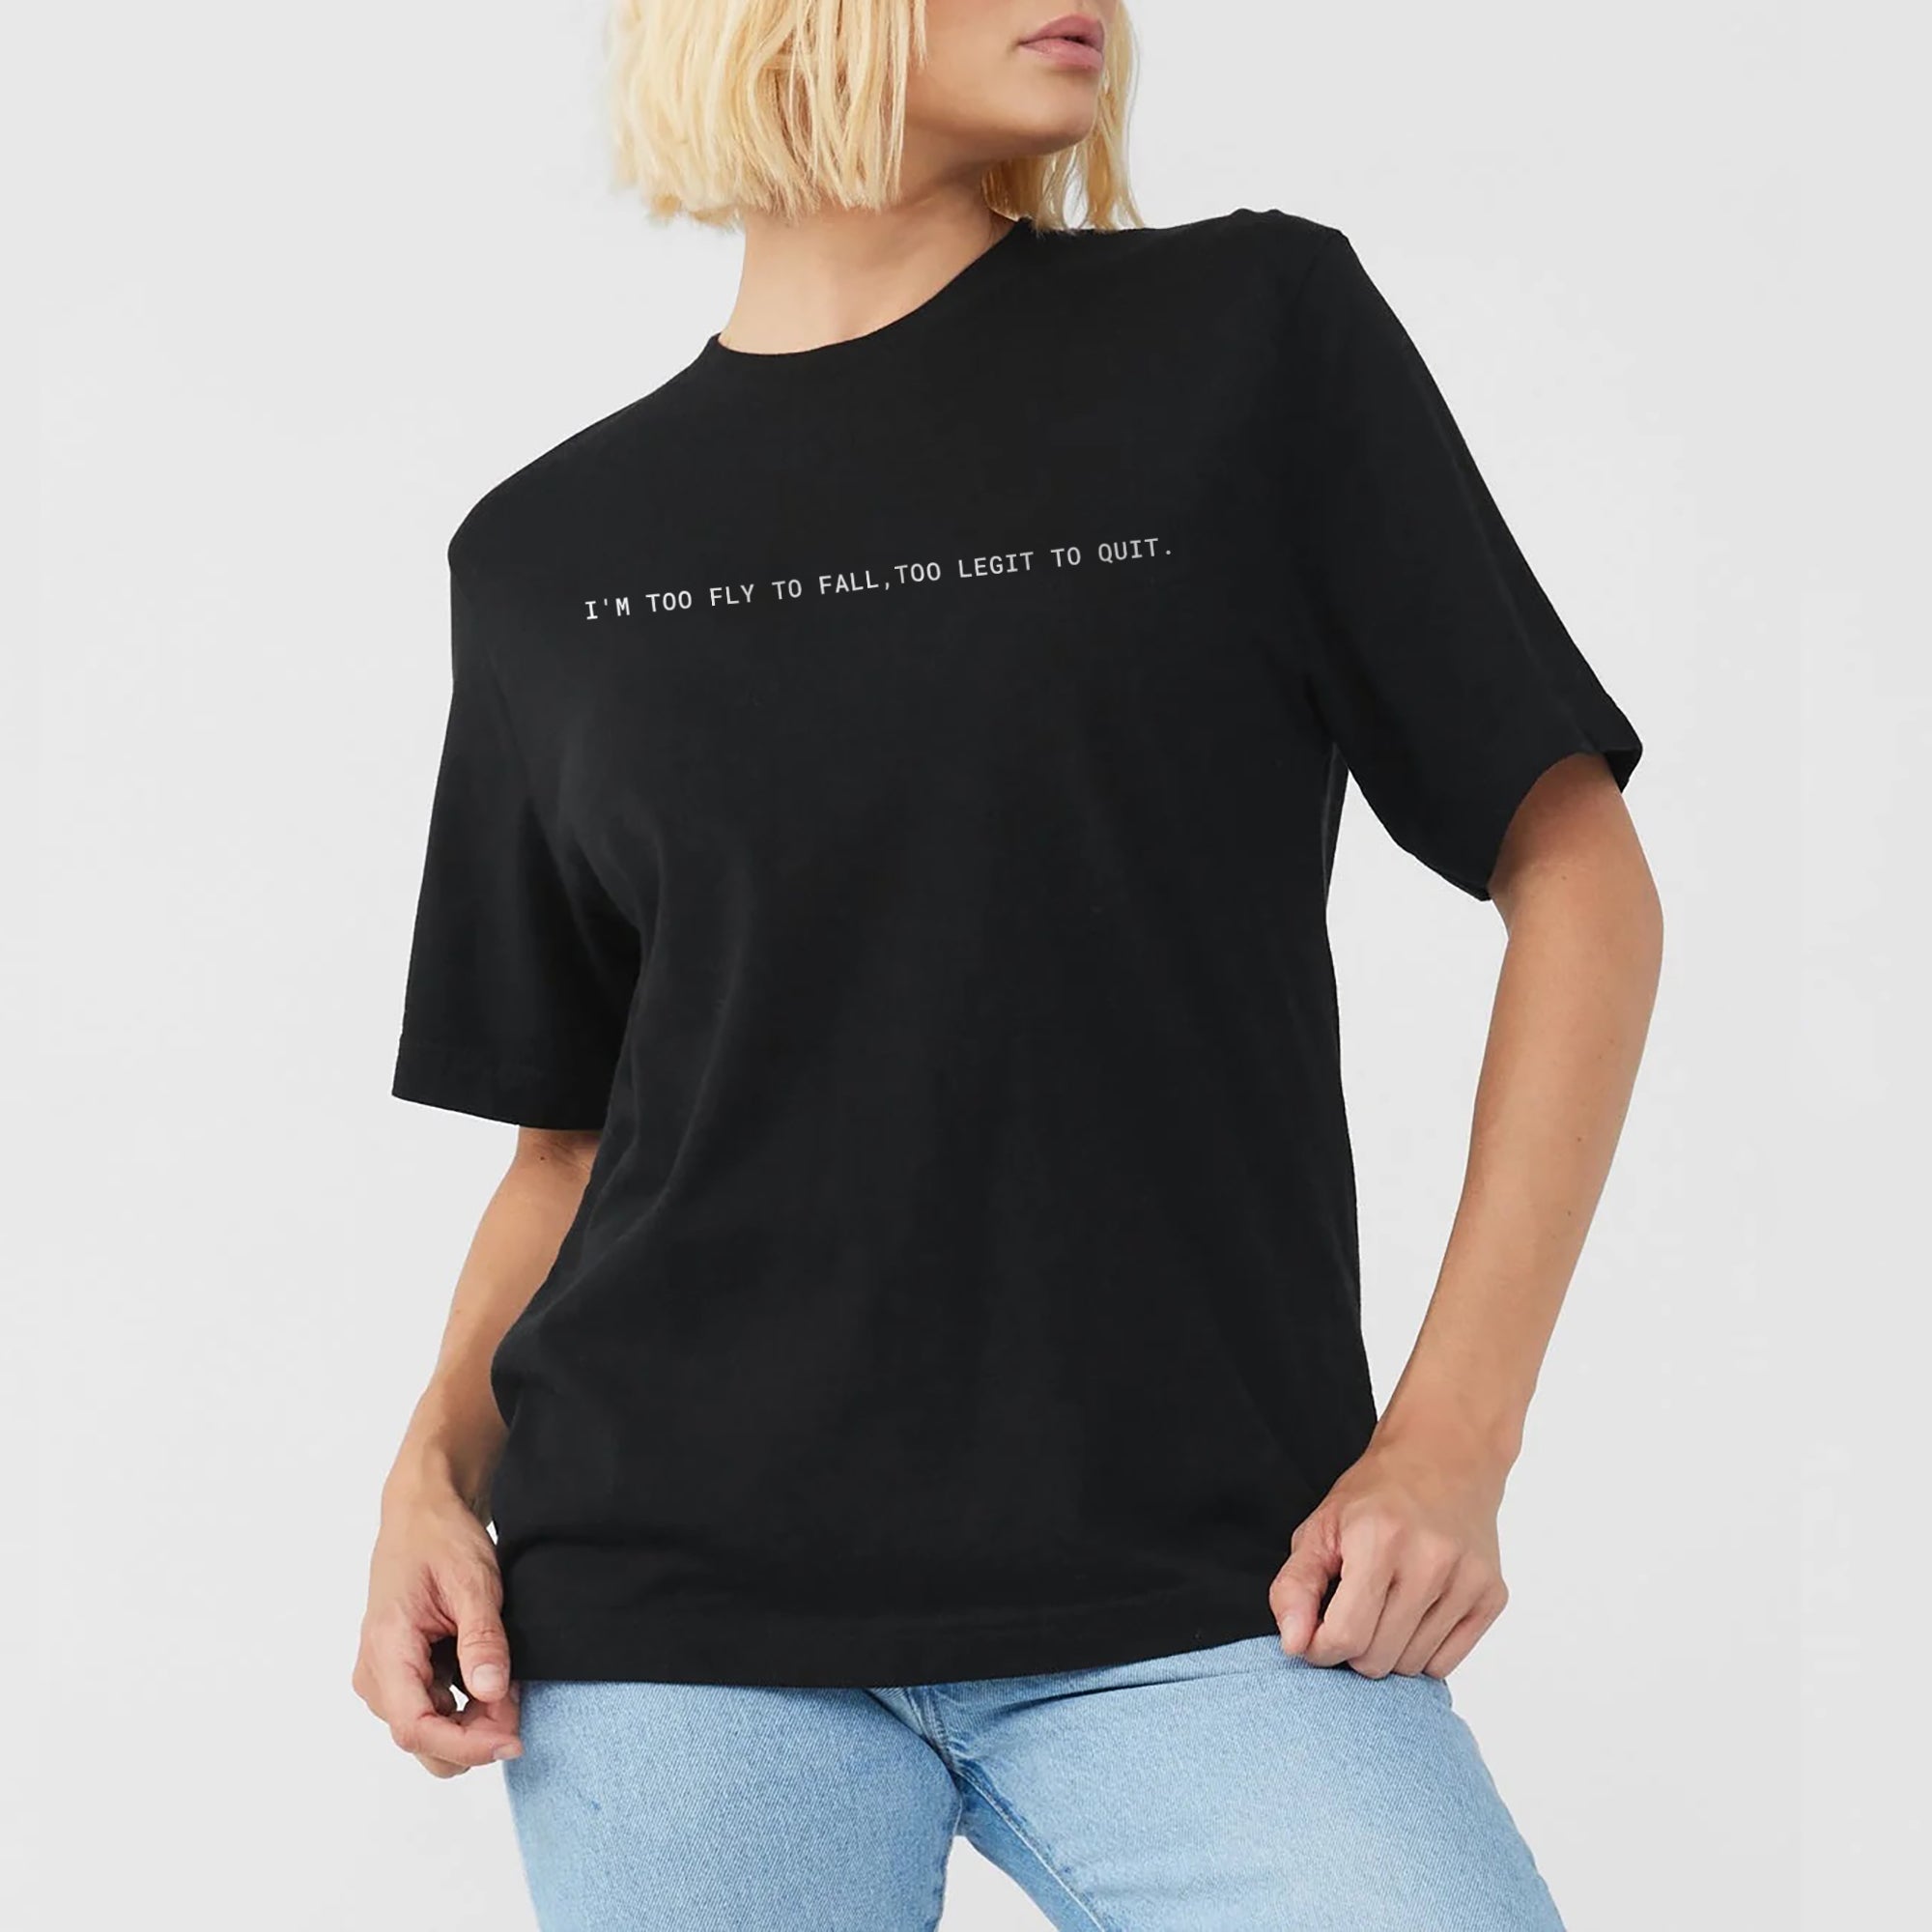 I'm too fly to fall,too legit to quit Boyfriend Crew Tee Solid Black Image